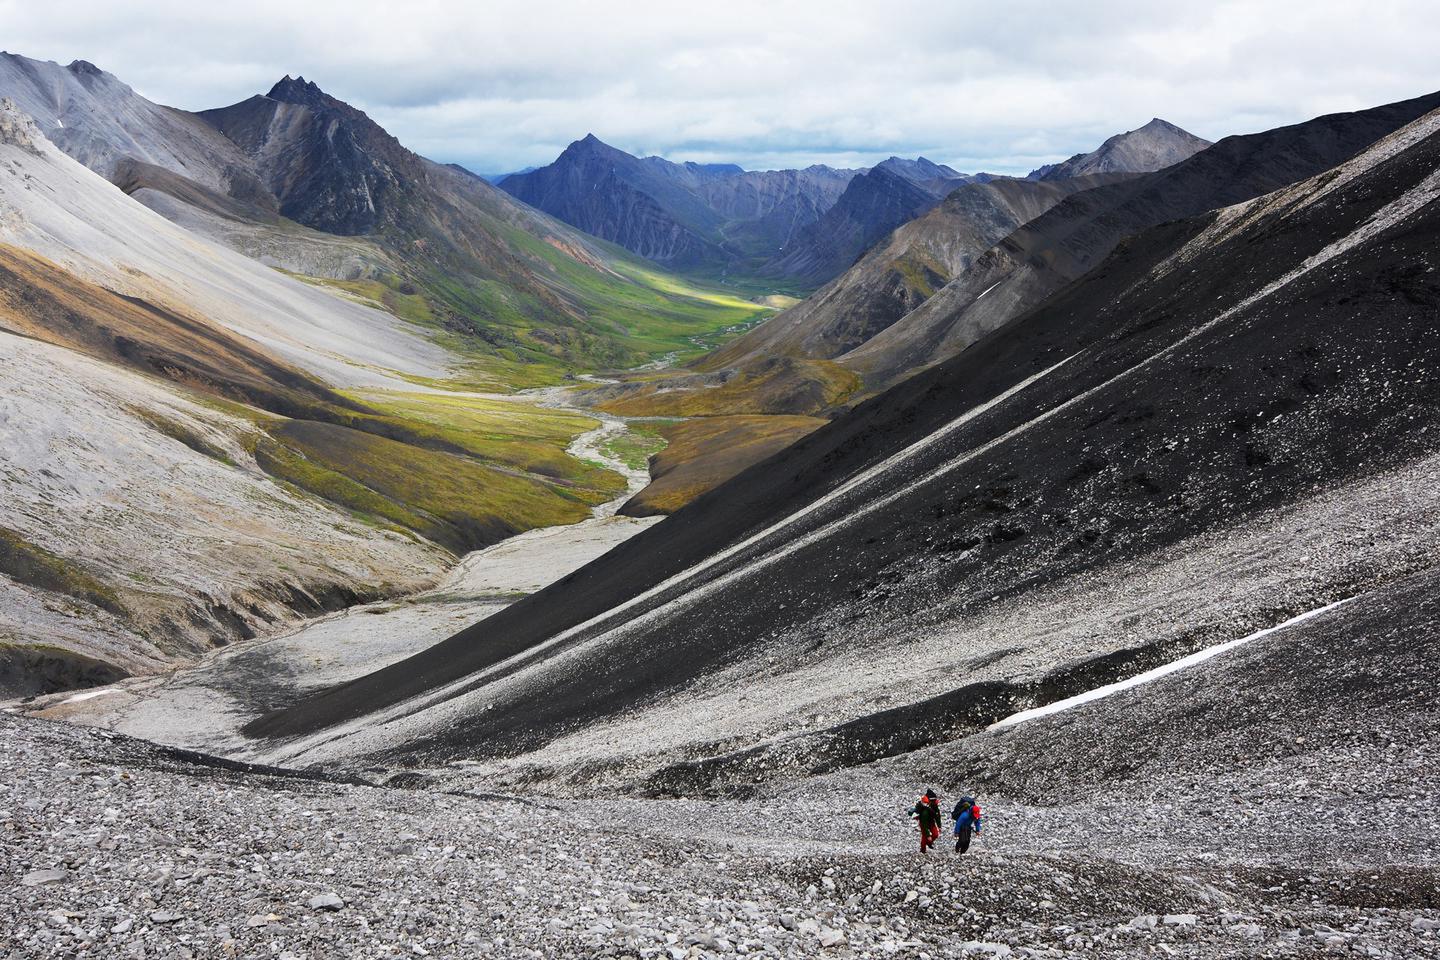 Hikers crossing a mountain passHikers choose river valleys as corridors when hiking over mountain passes.